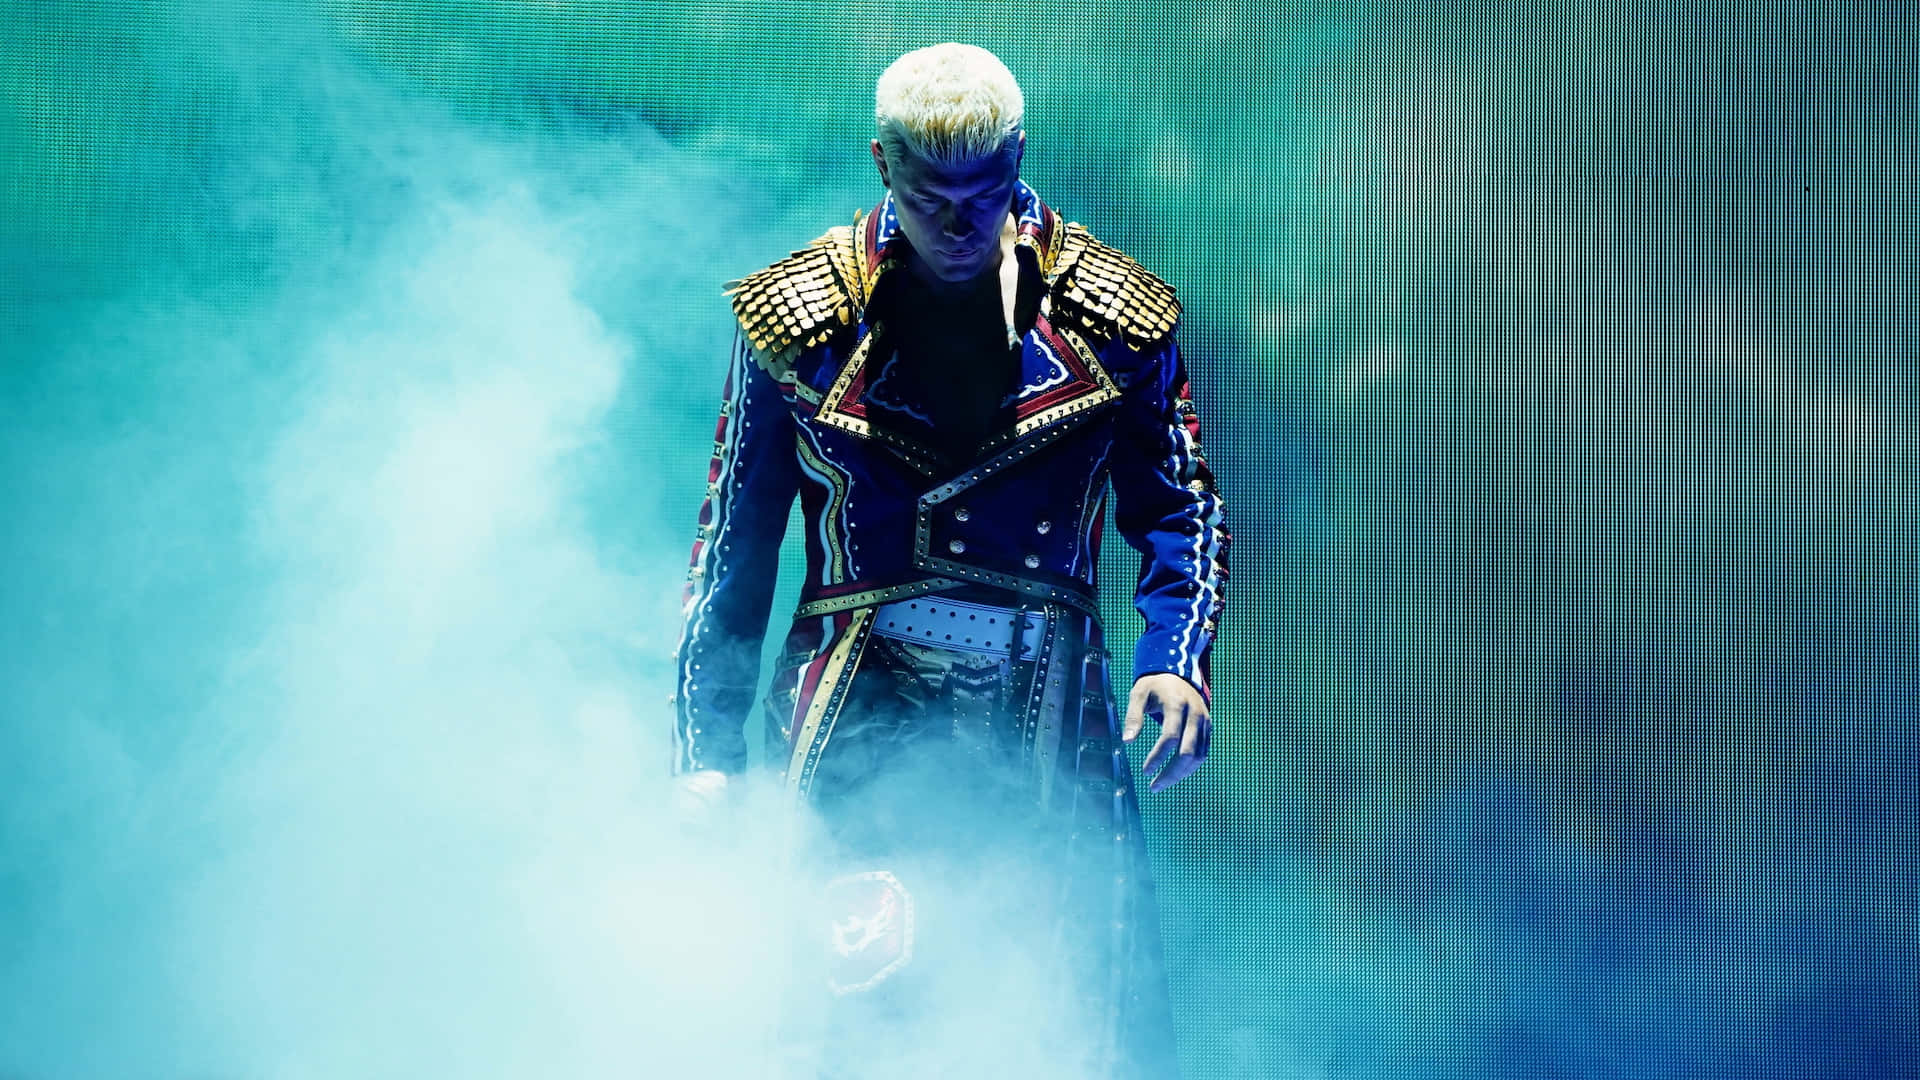 Cody Rhodes Wwe Entrance Picture